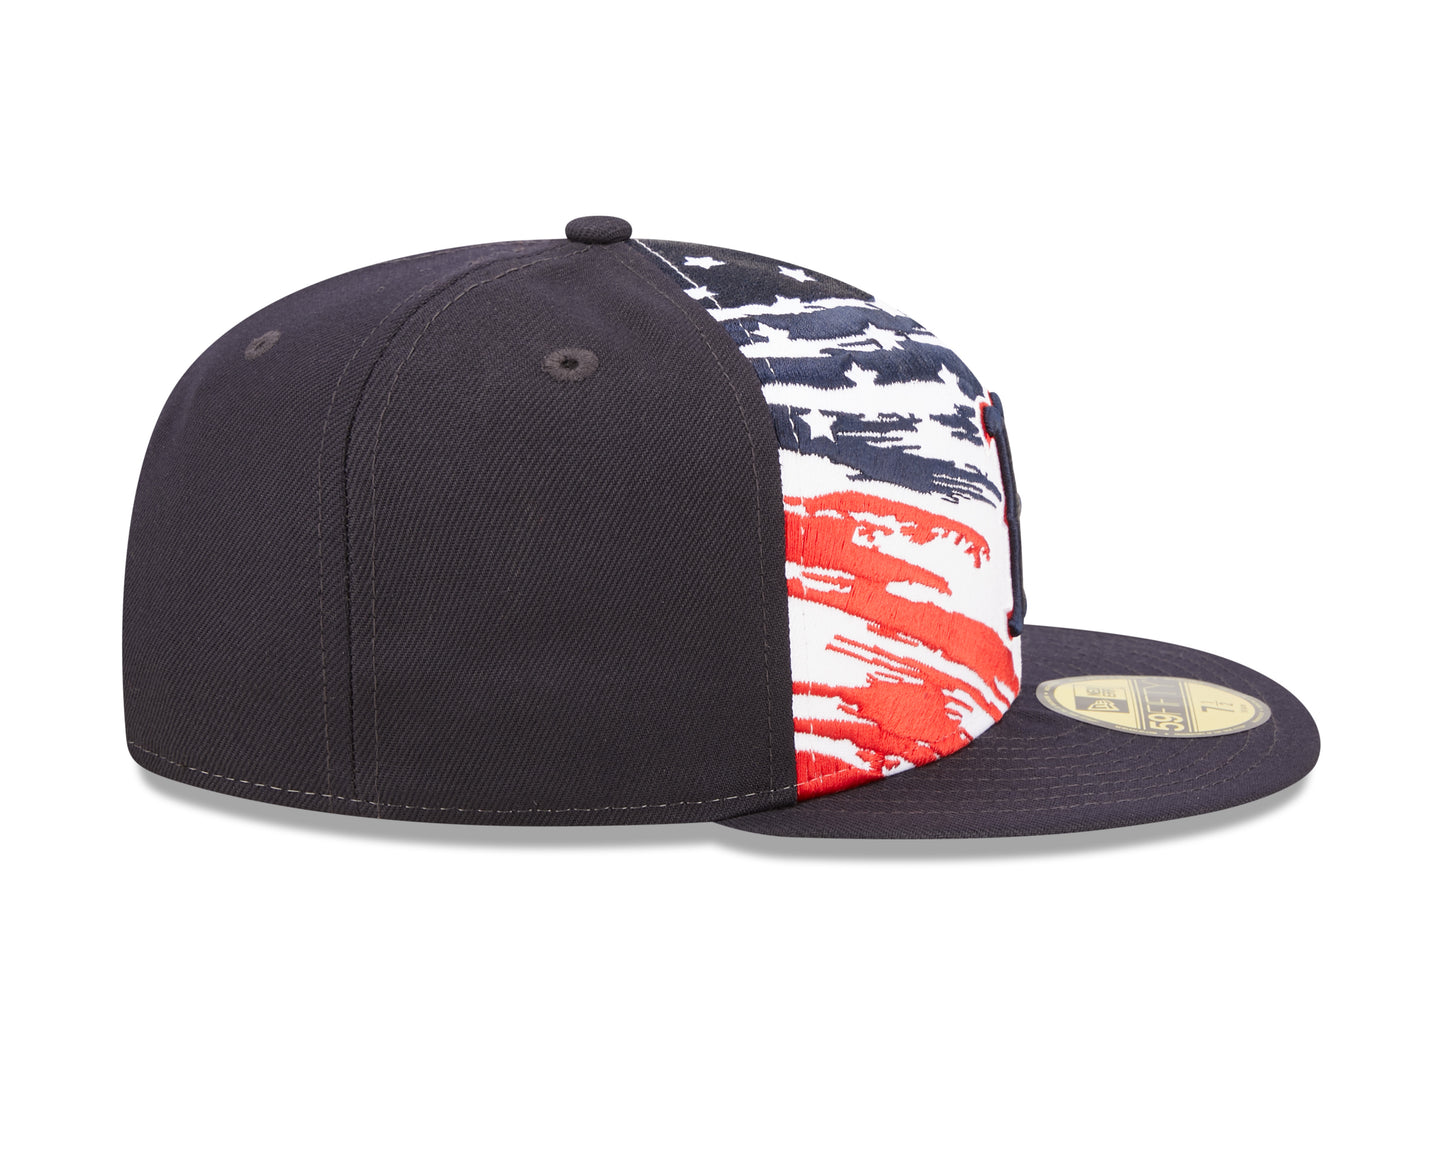 Boston Red Sox Stars and Stripes July 4th 59fifty Fitted Hats